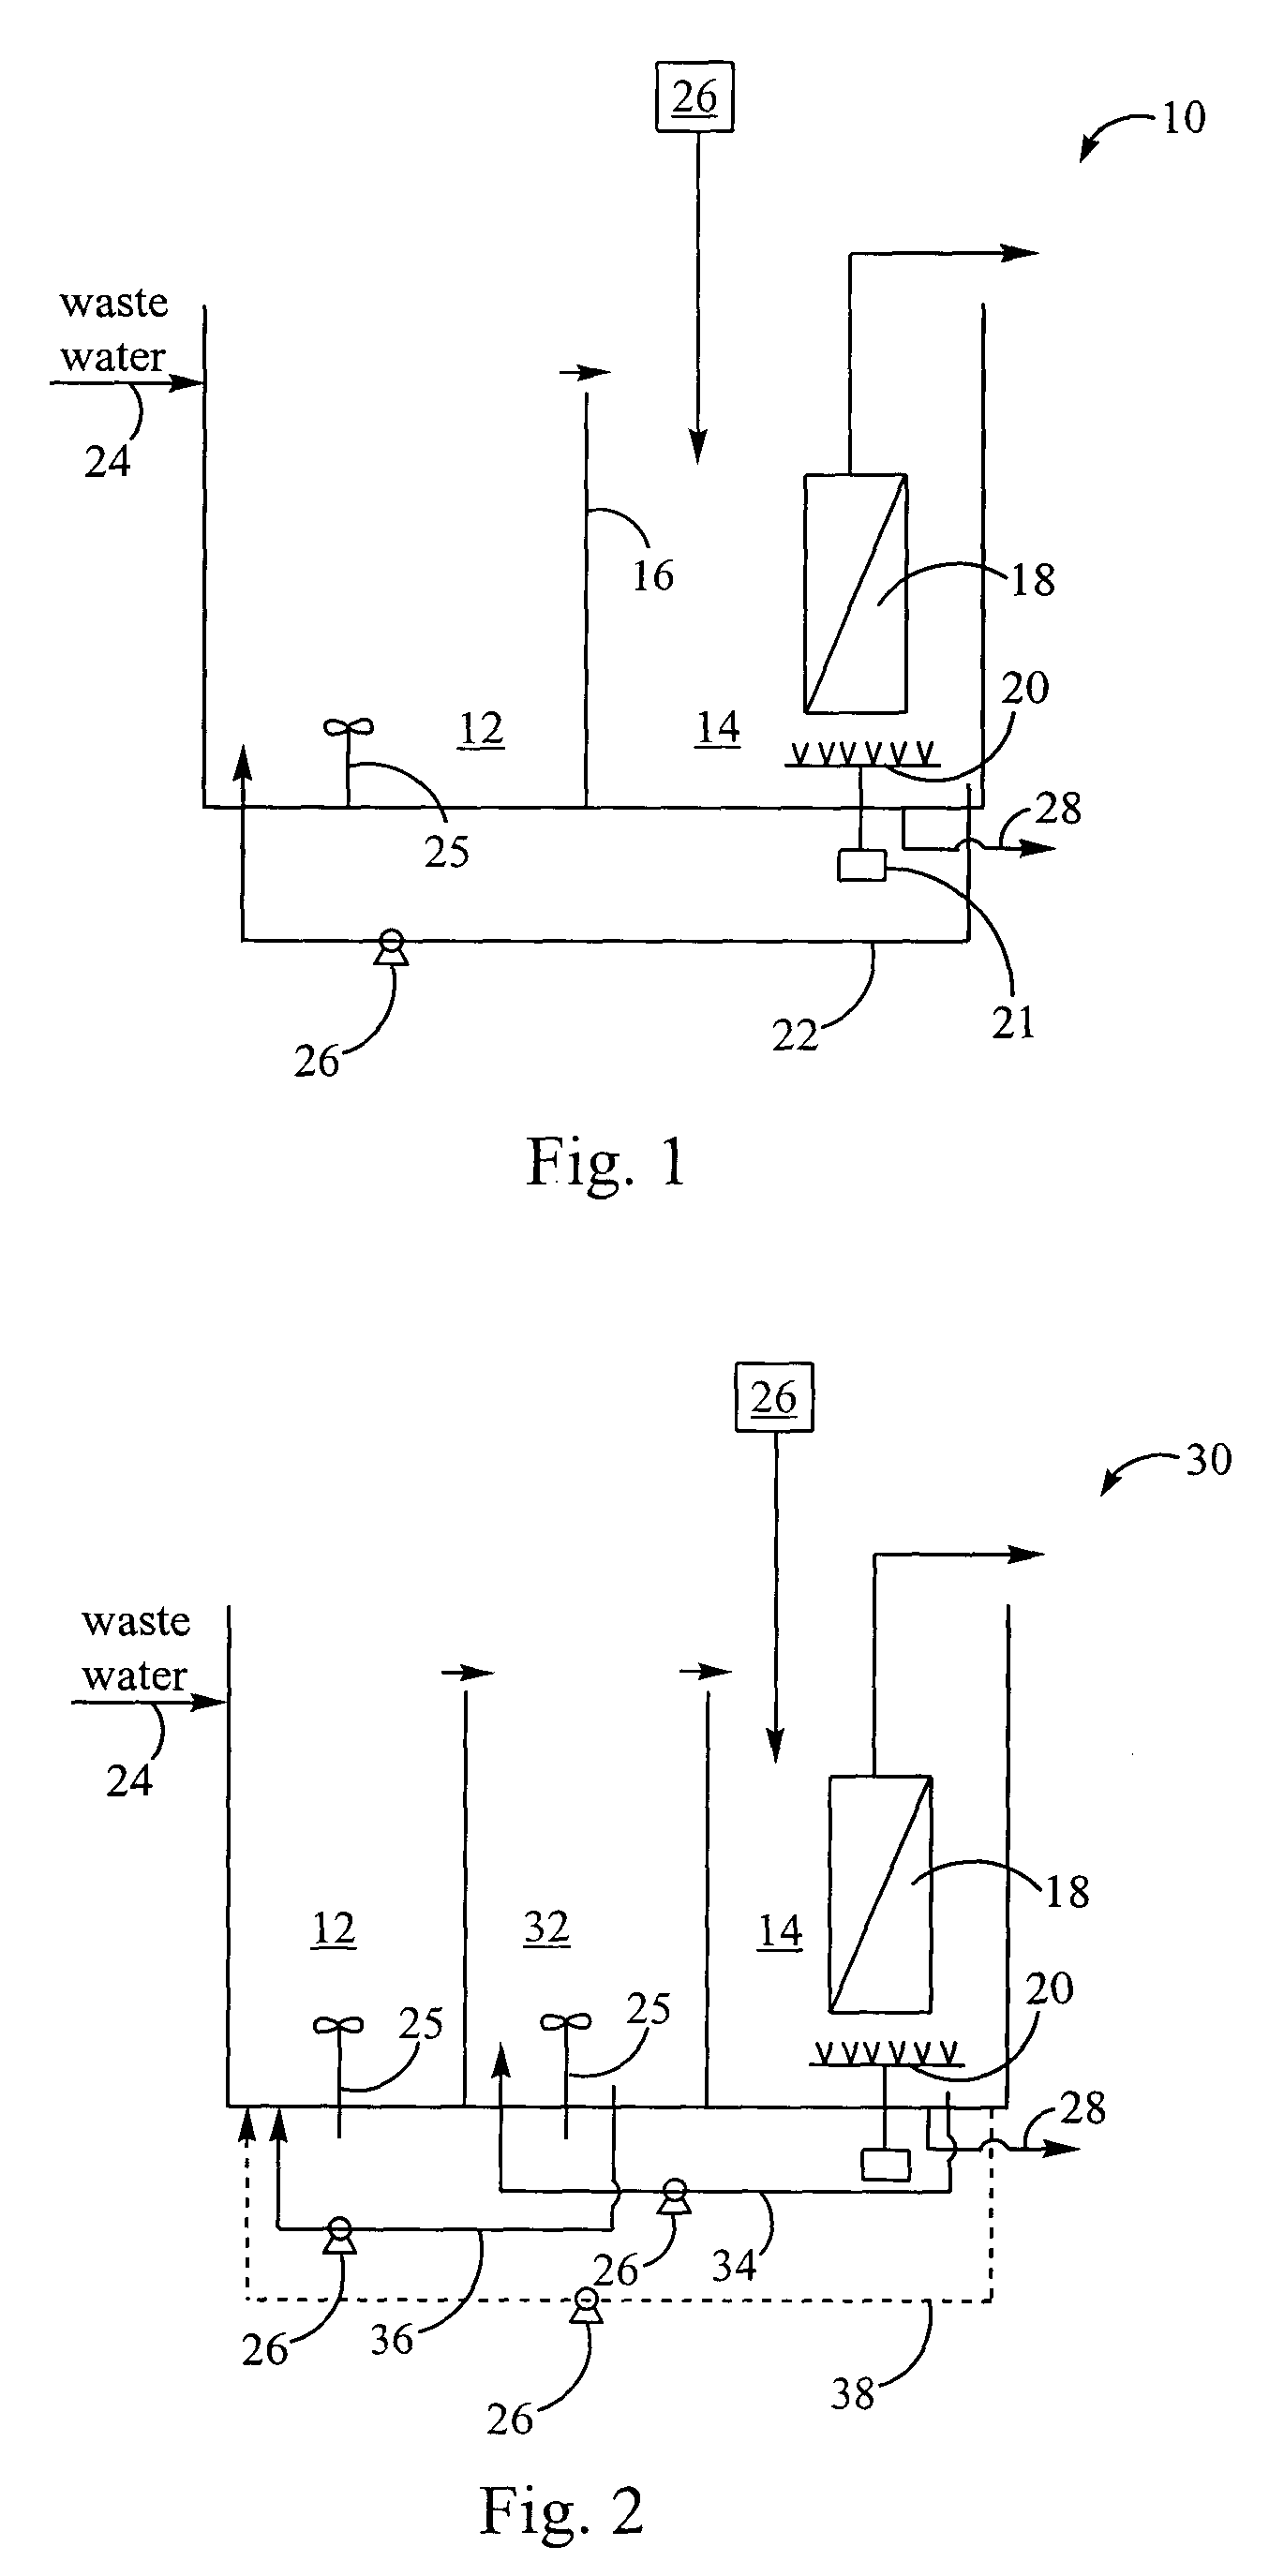 Method for treating wastewater in a membrane bioreactor to produce a low phosphorus effluent